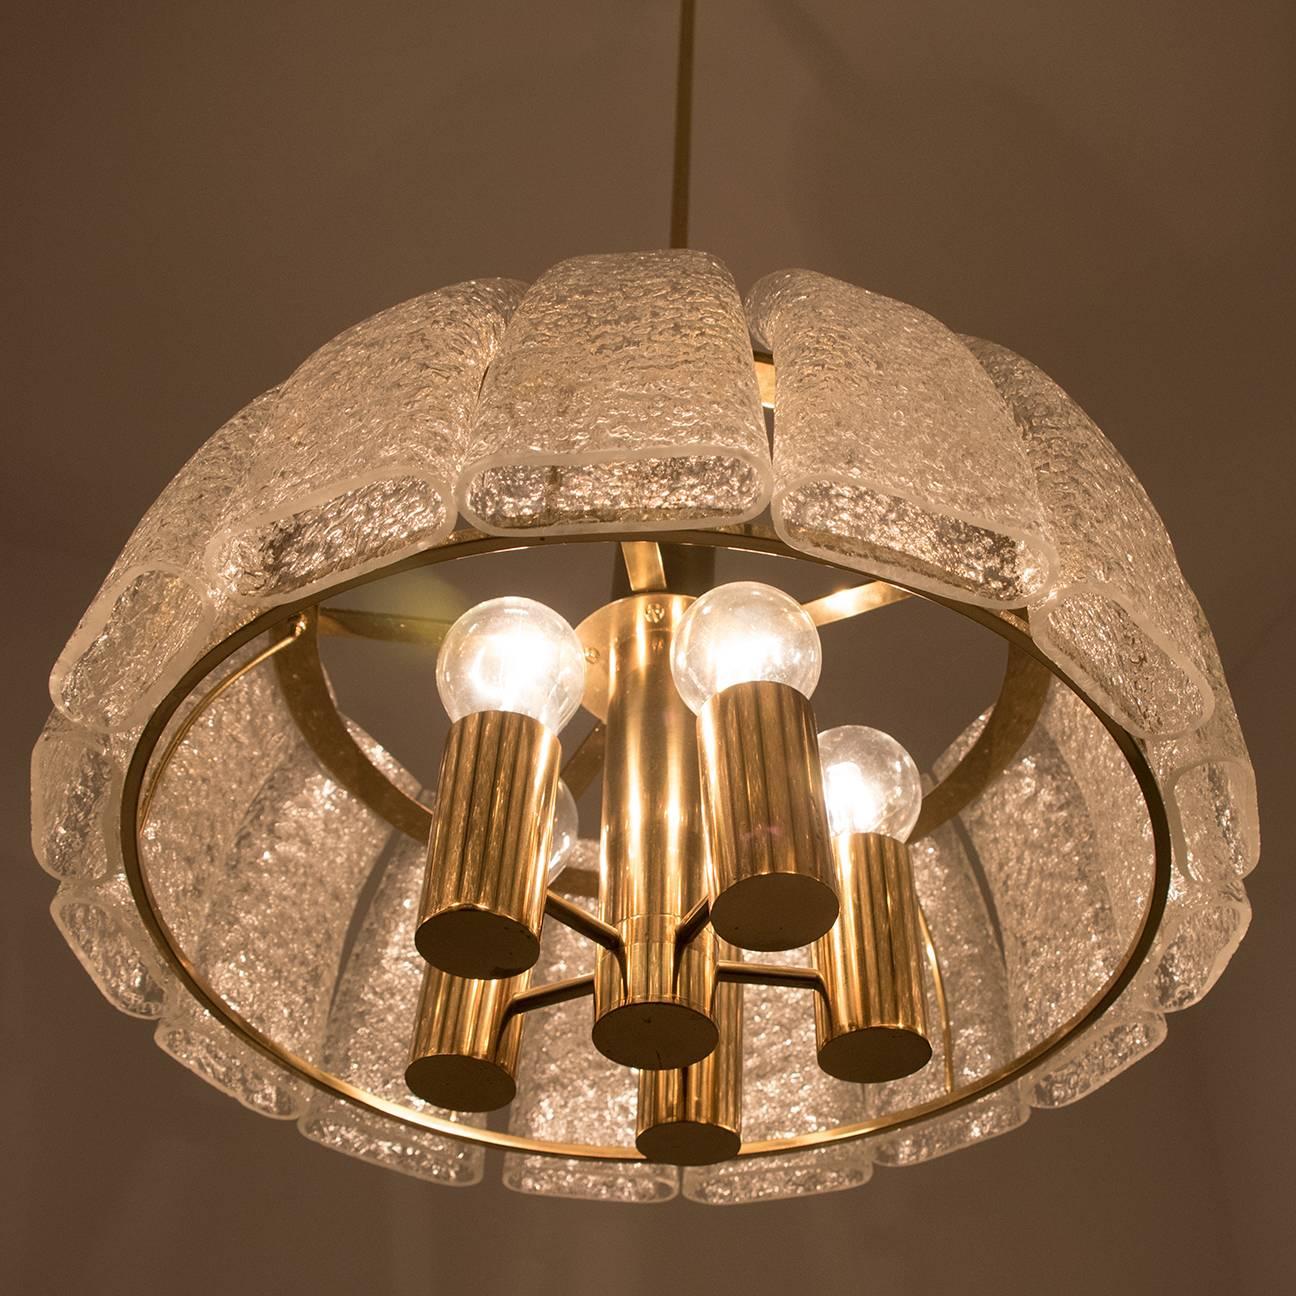 Mid-Century Modern Doria Light Fixtures, One Chandelier and Two Wall Sconces For Sale